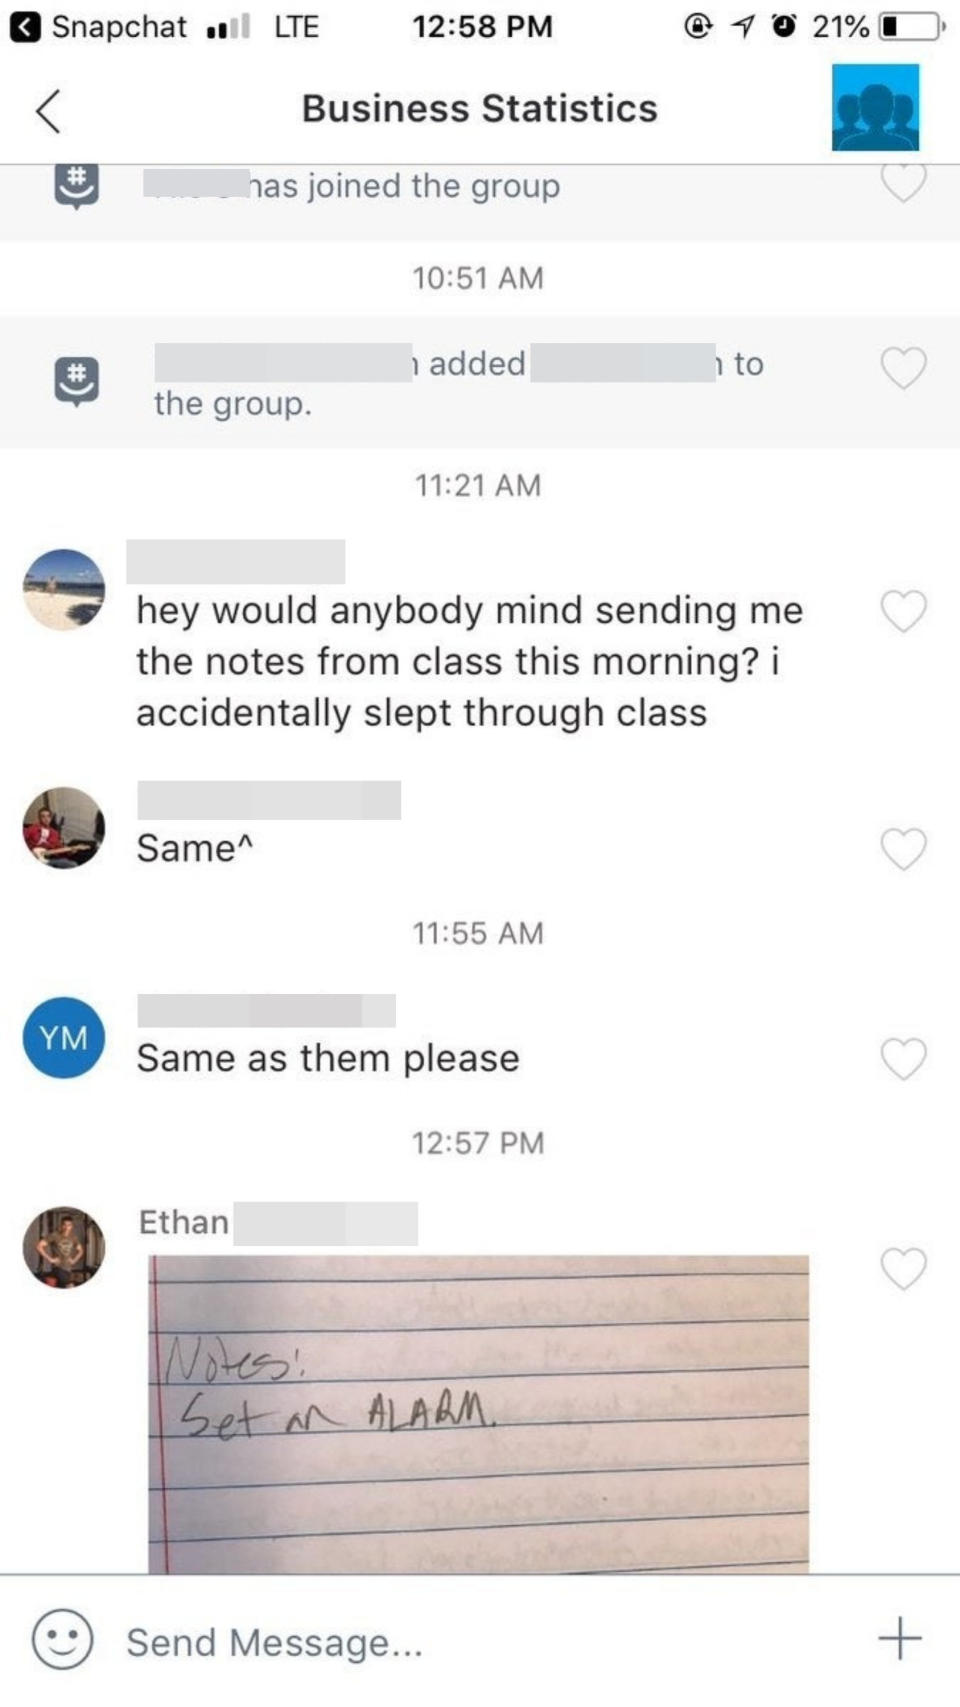 Messages from several classmates asking for notes from the day's lecture since they accidentally slept through class